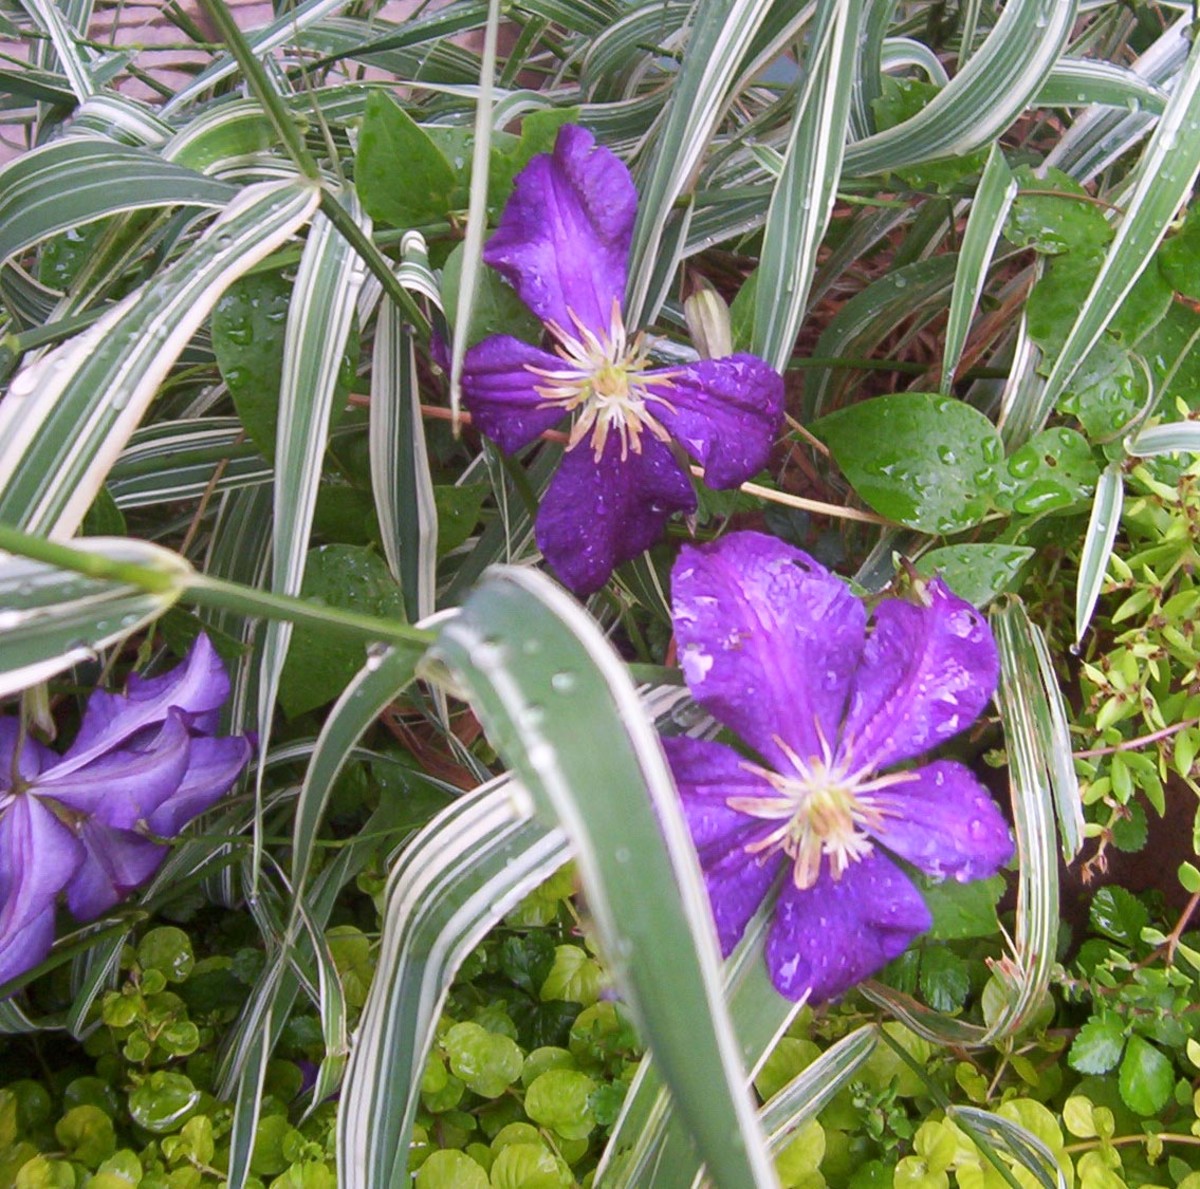 These Clematis, Jackmanii flowers are a nice purple.